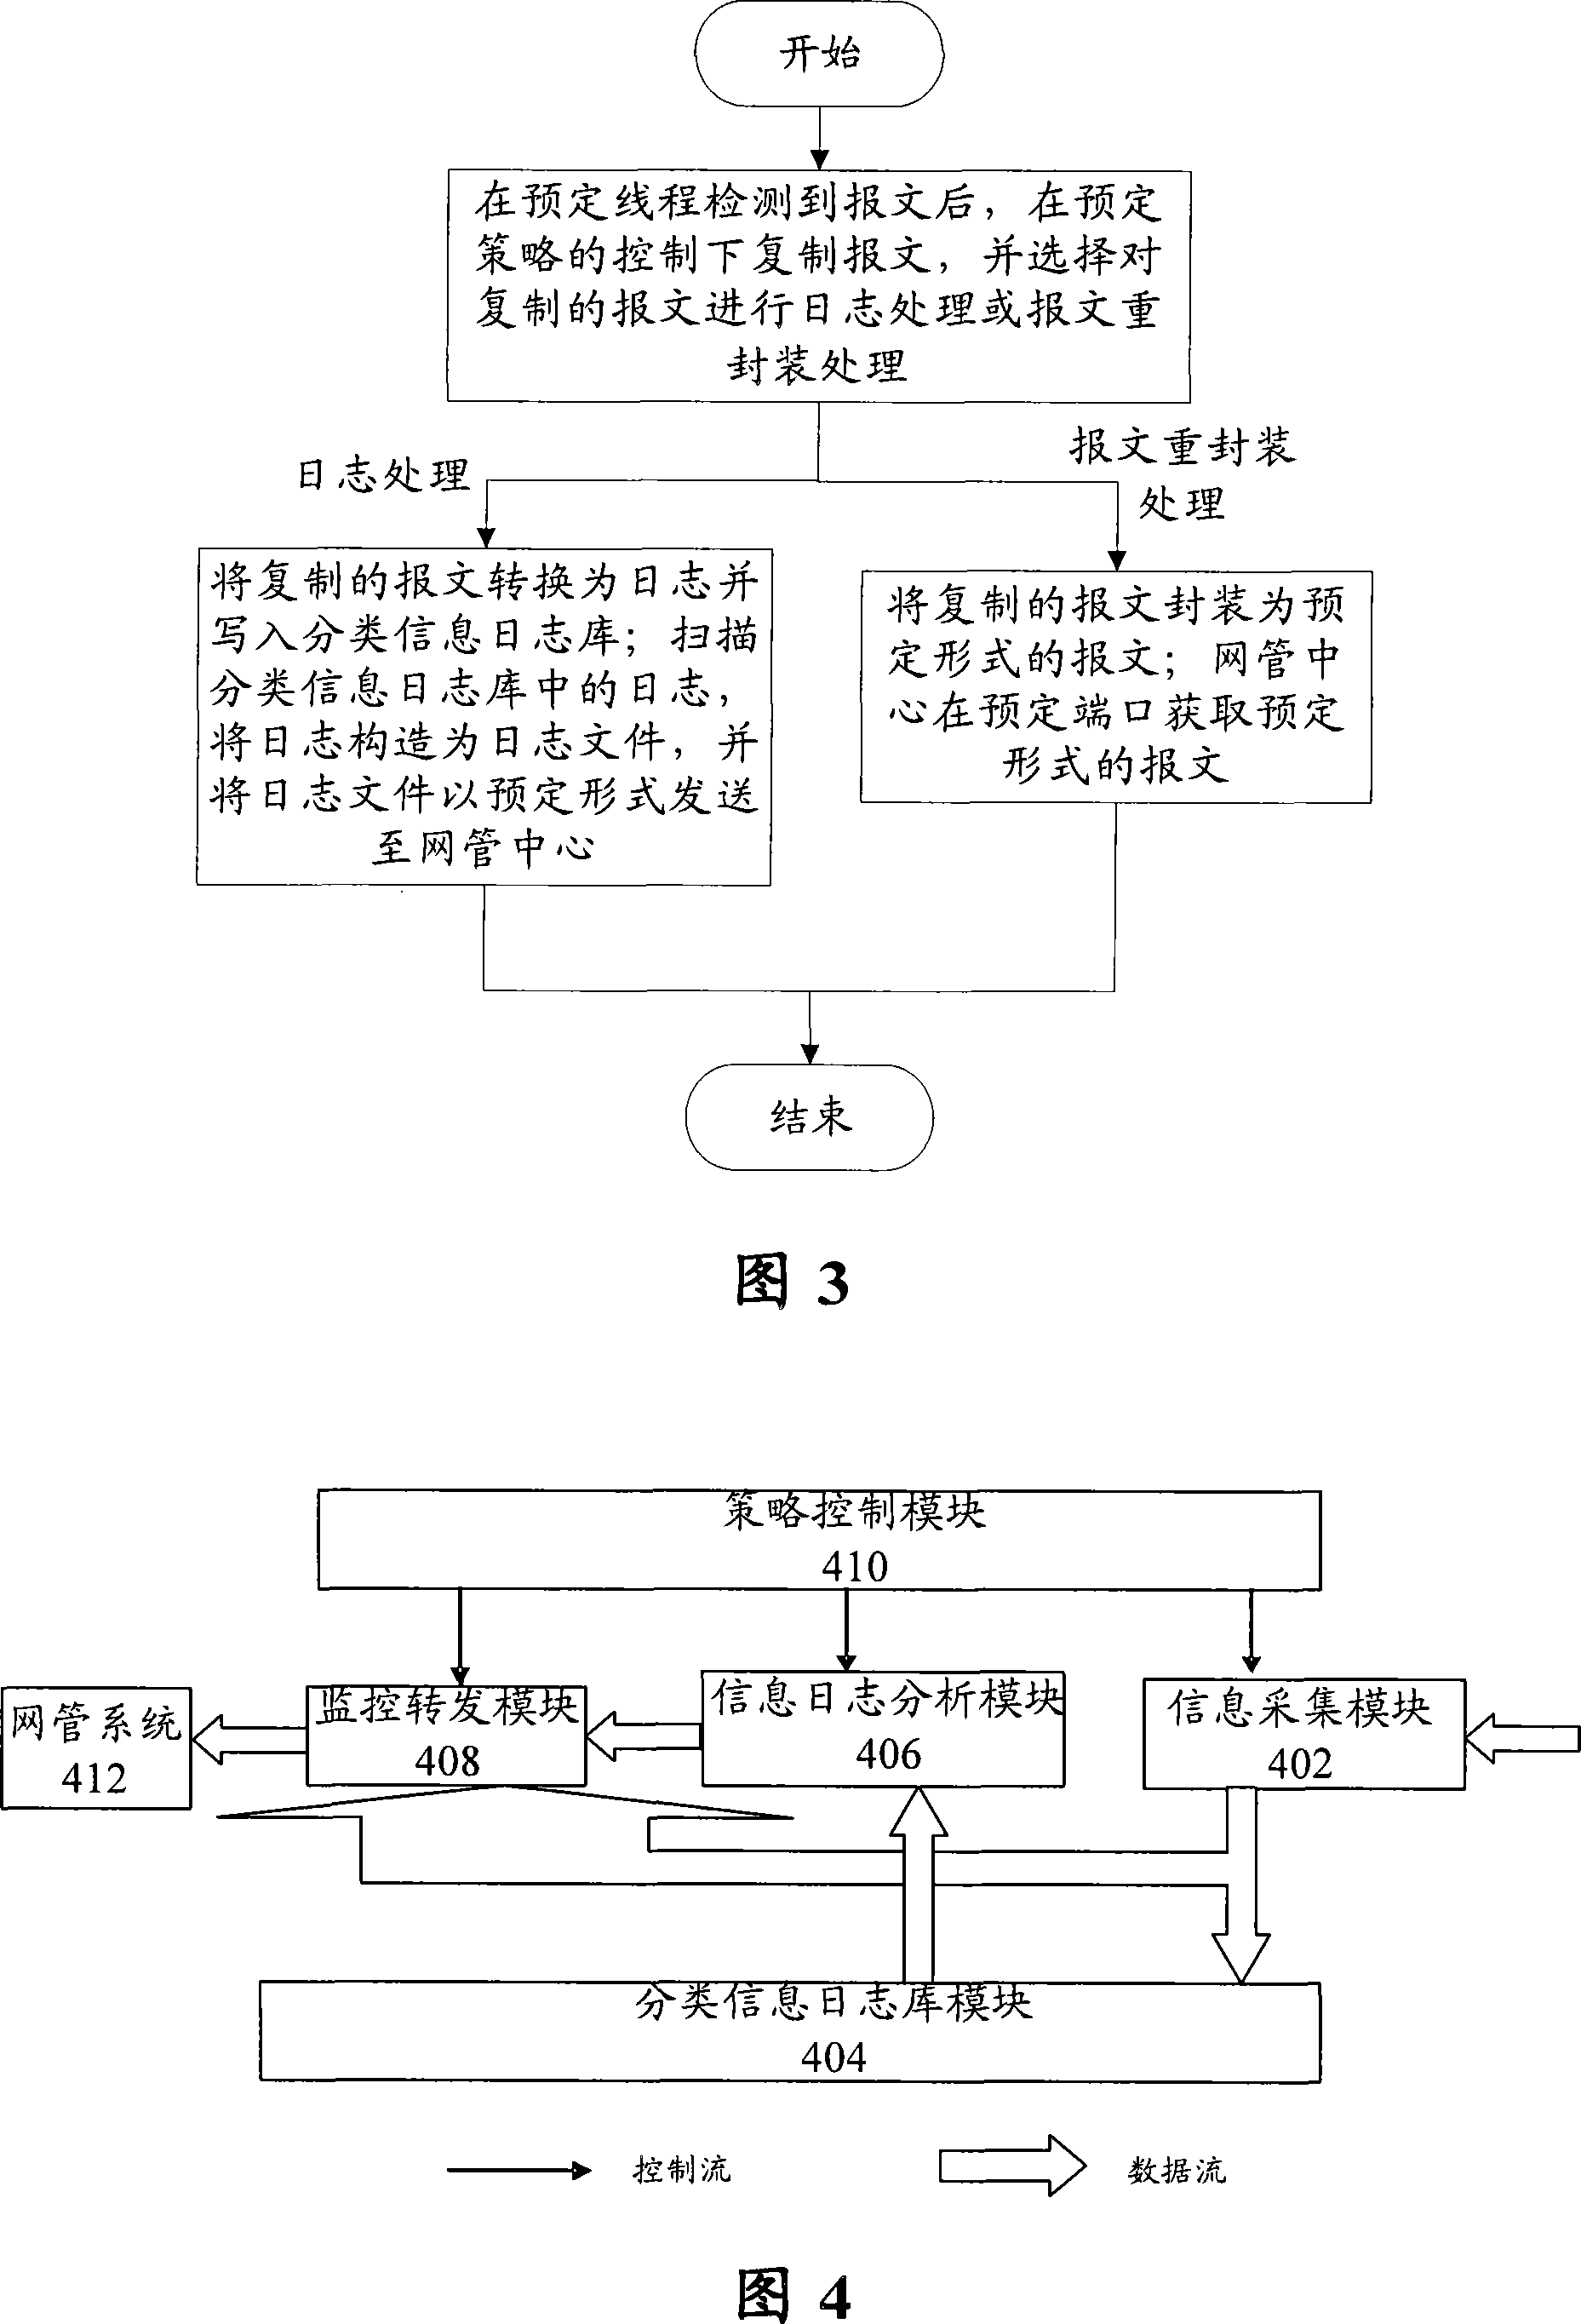 State monitoring method and system